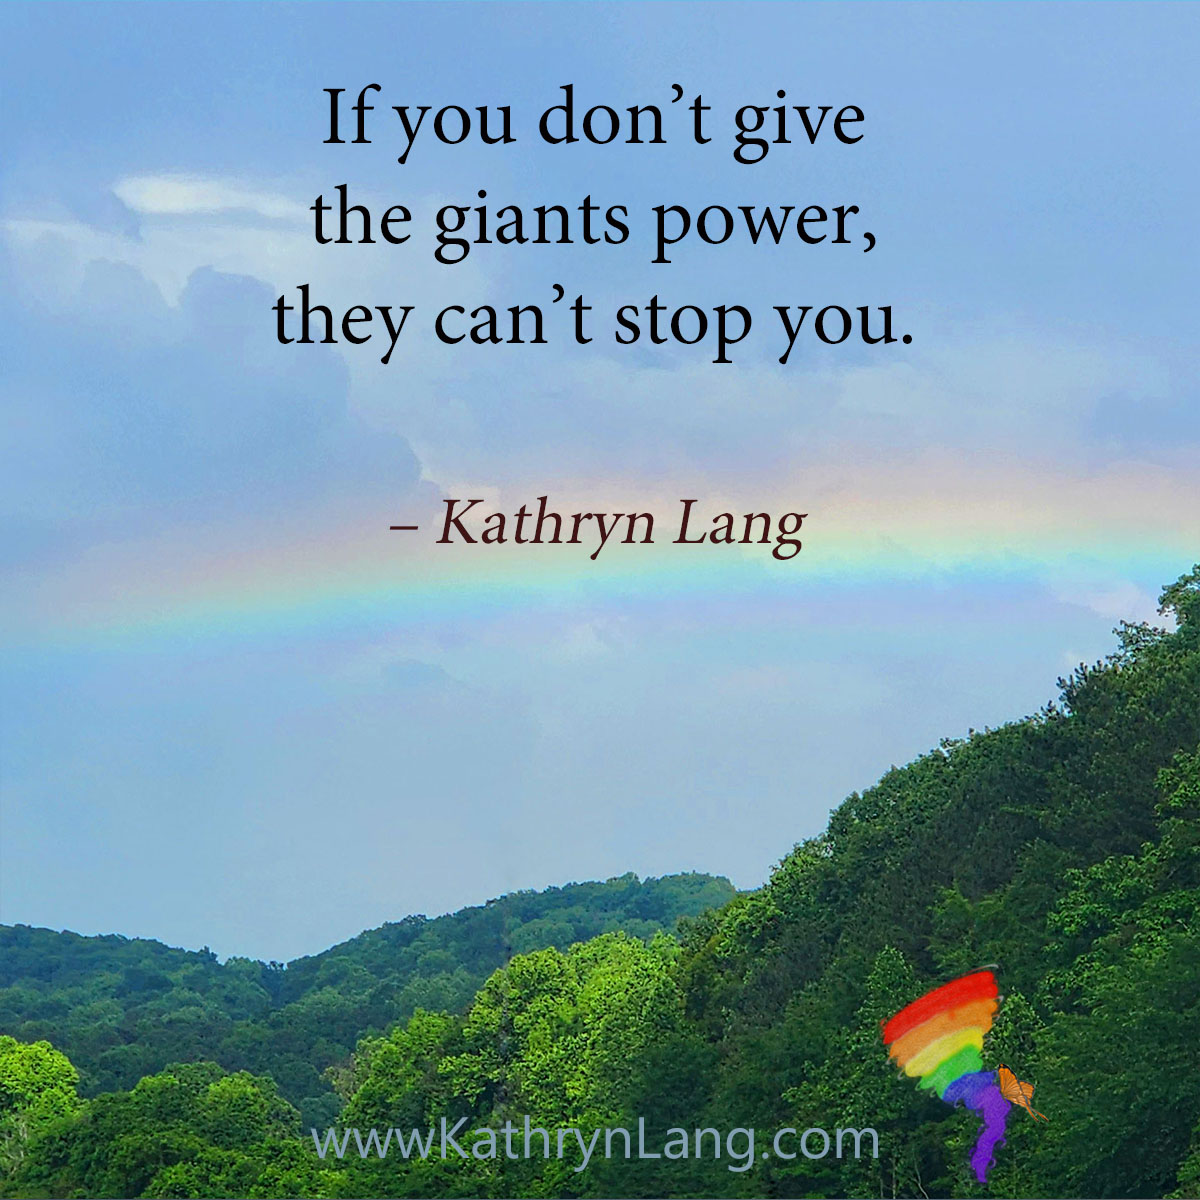 #QuoteoftheDay

If you don’t give 
the giants power, 
they can’t stop you. 
- Kathryn Lang